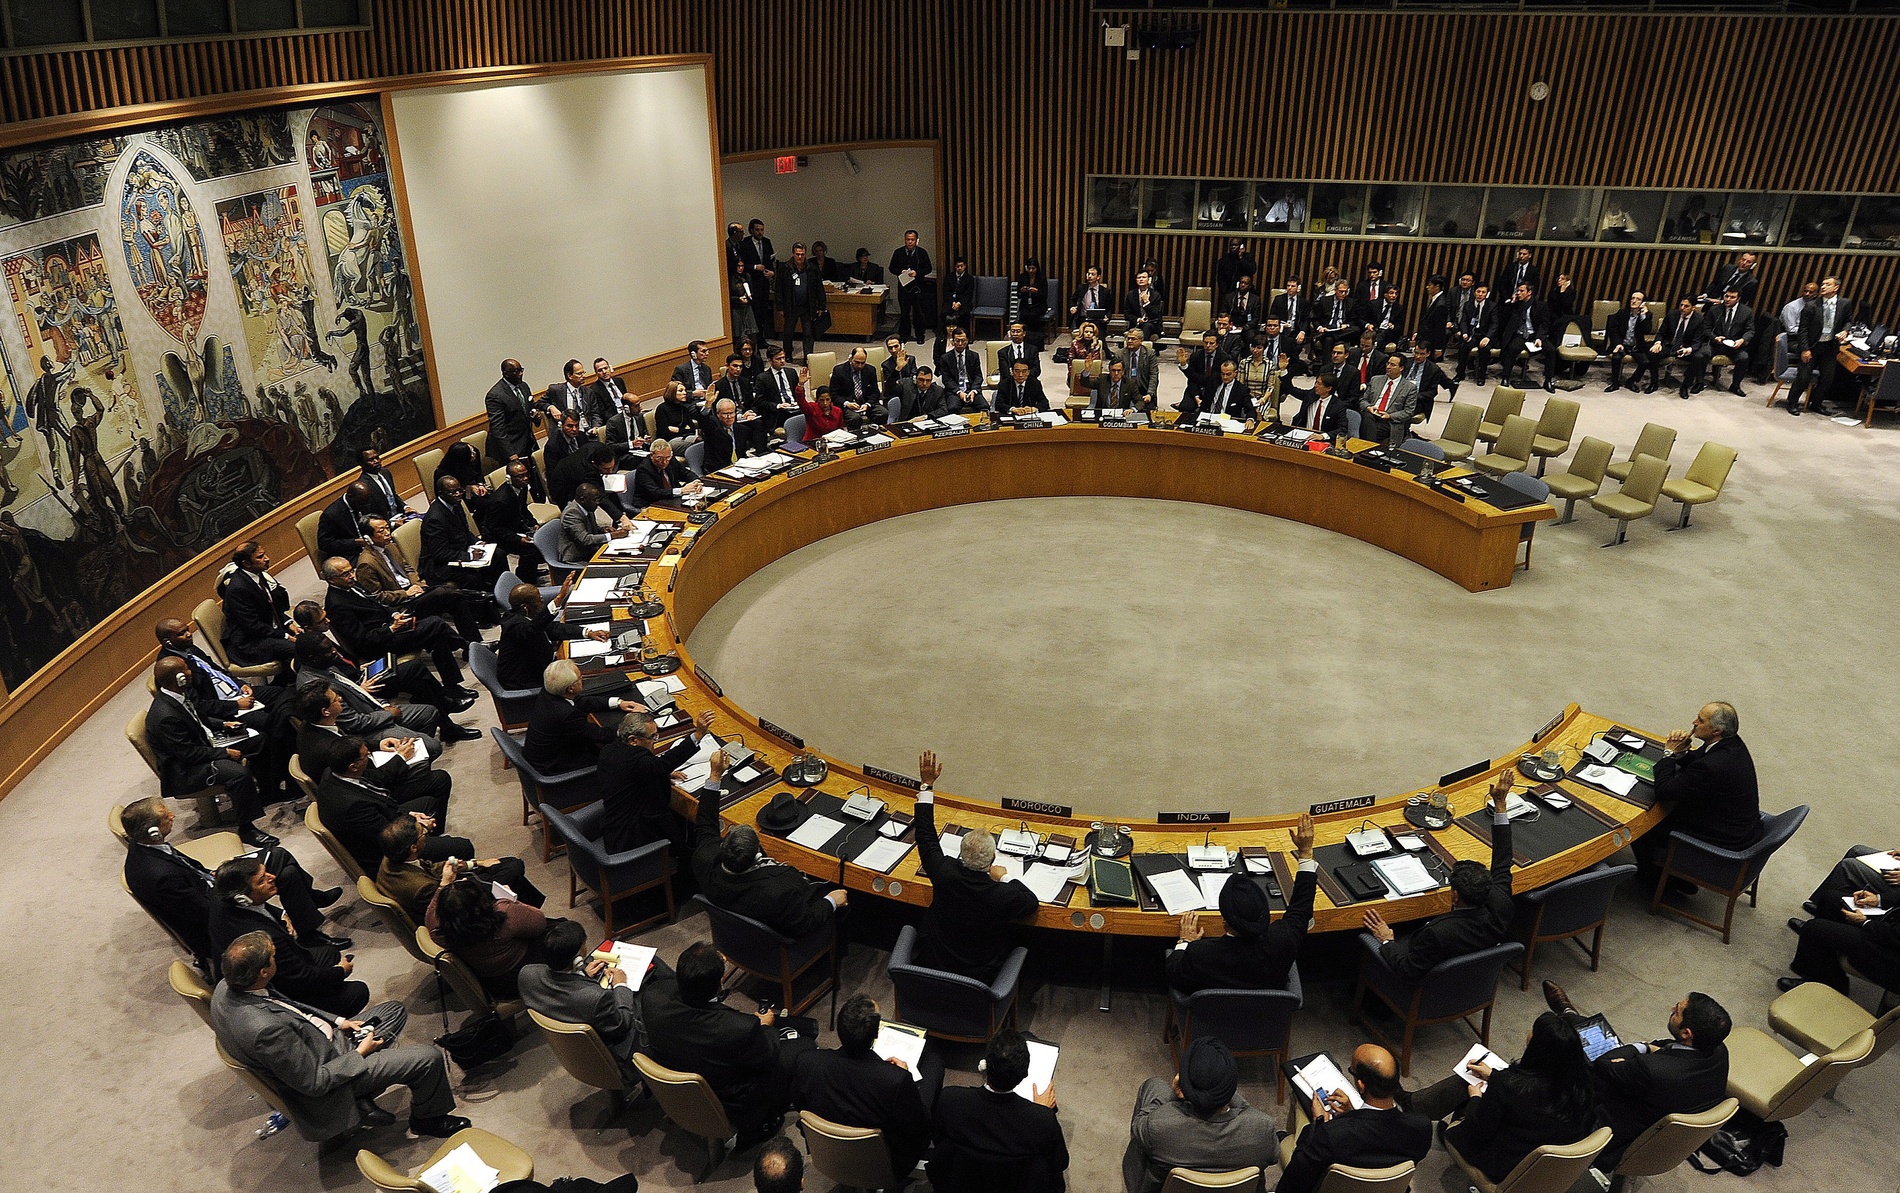 Picture of the UN Security Council: Men and women sitting in a semicircle voting on something.